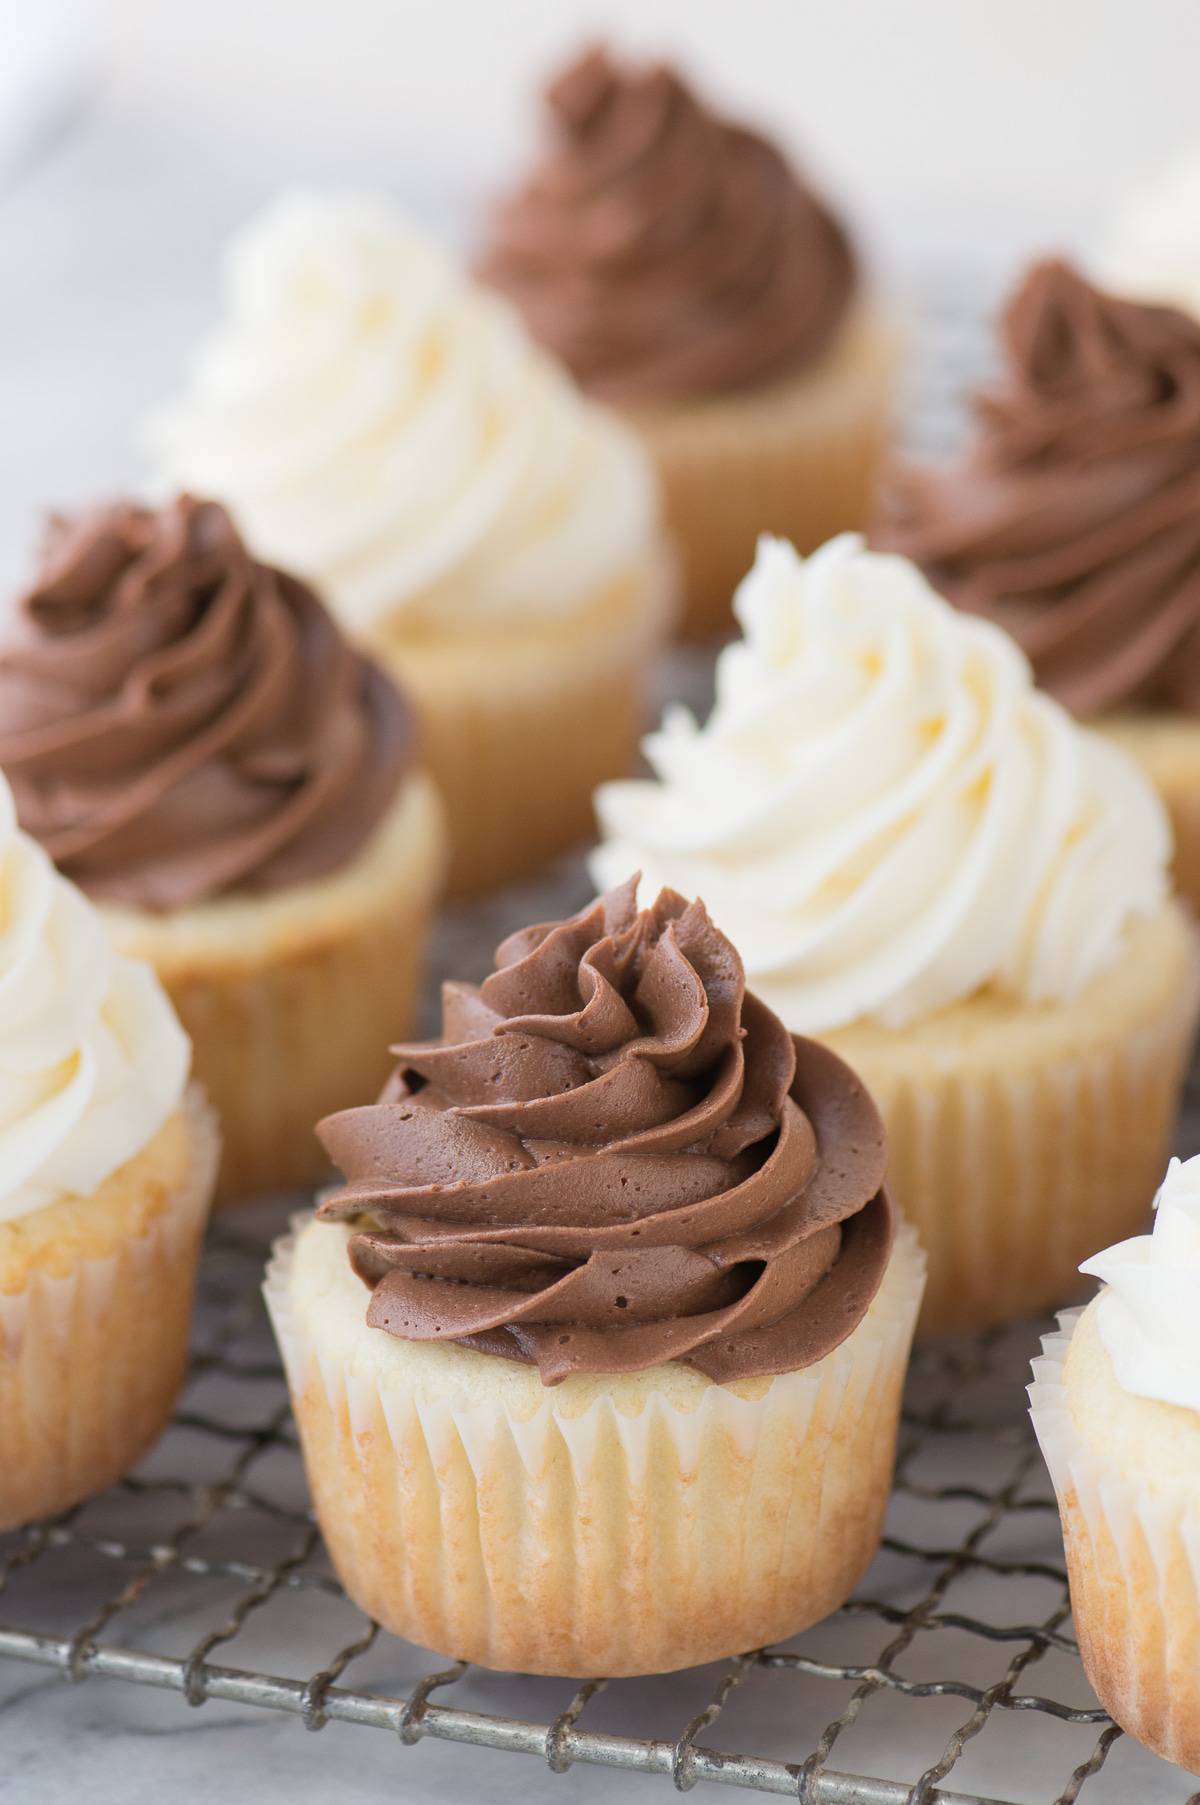 This CLASSIC WHITE CUPCAKE recipe is AMAZING! This is our go-to white cupcake recipe because it’s so moist and flavorful. Pair these cupcakes with vanilla or chocolate buttercream.